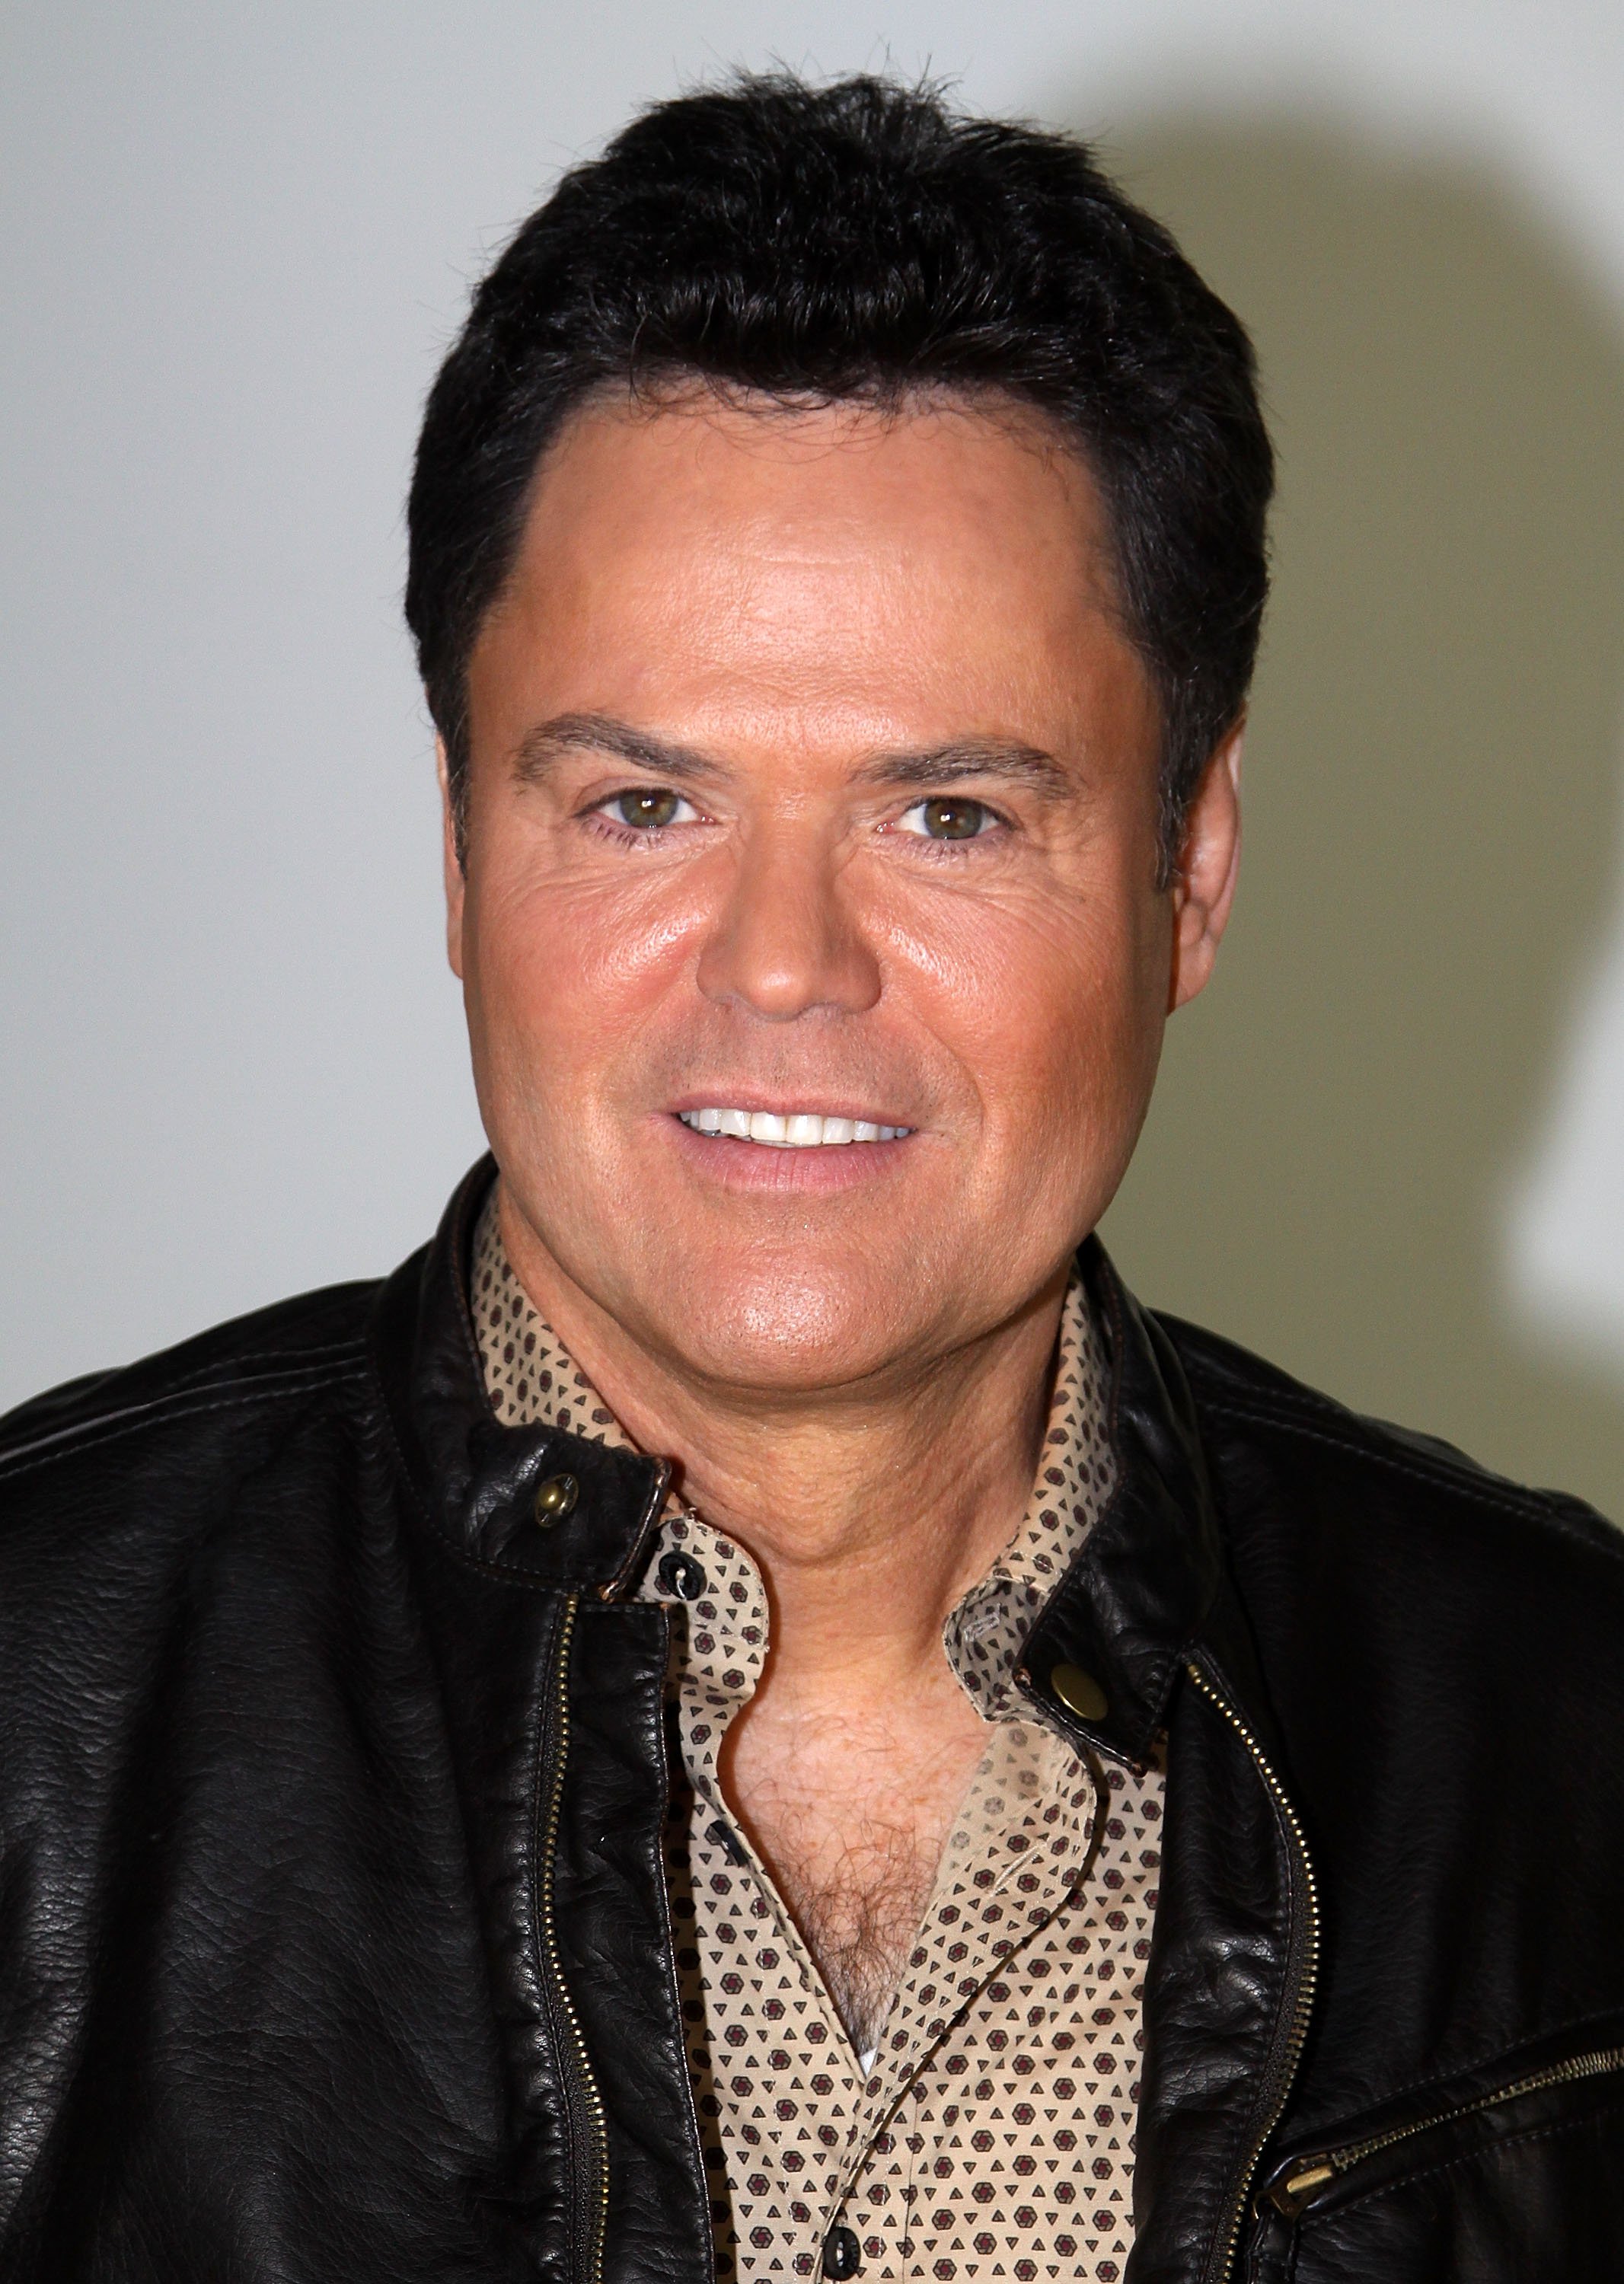 Donny Osmond poses as he promotes "A Broadway Christmas" at The Broadway.com Studios. | Source: Getty Images